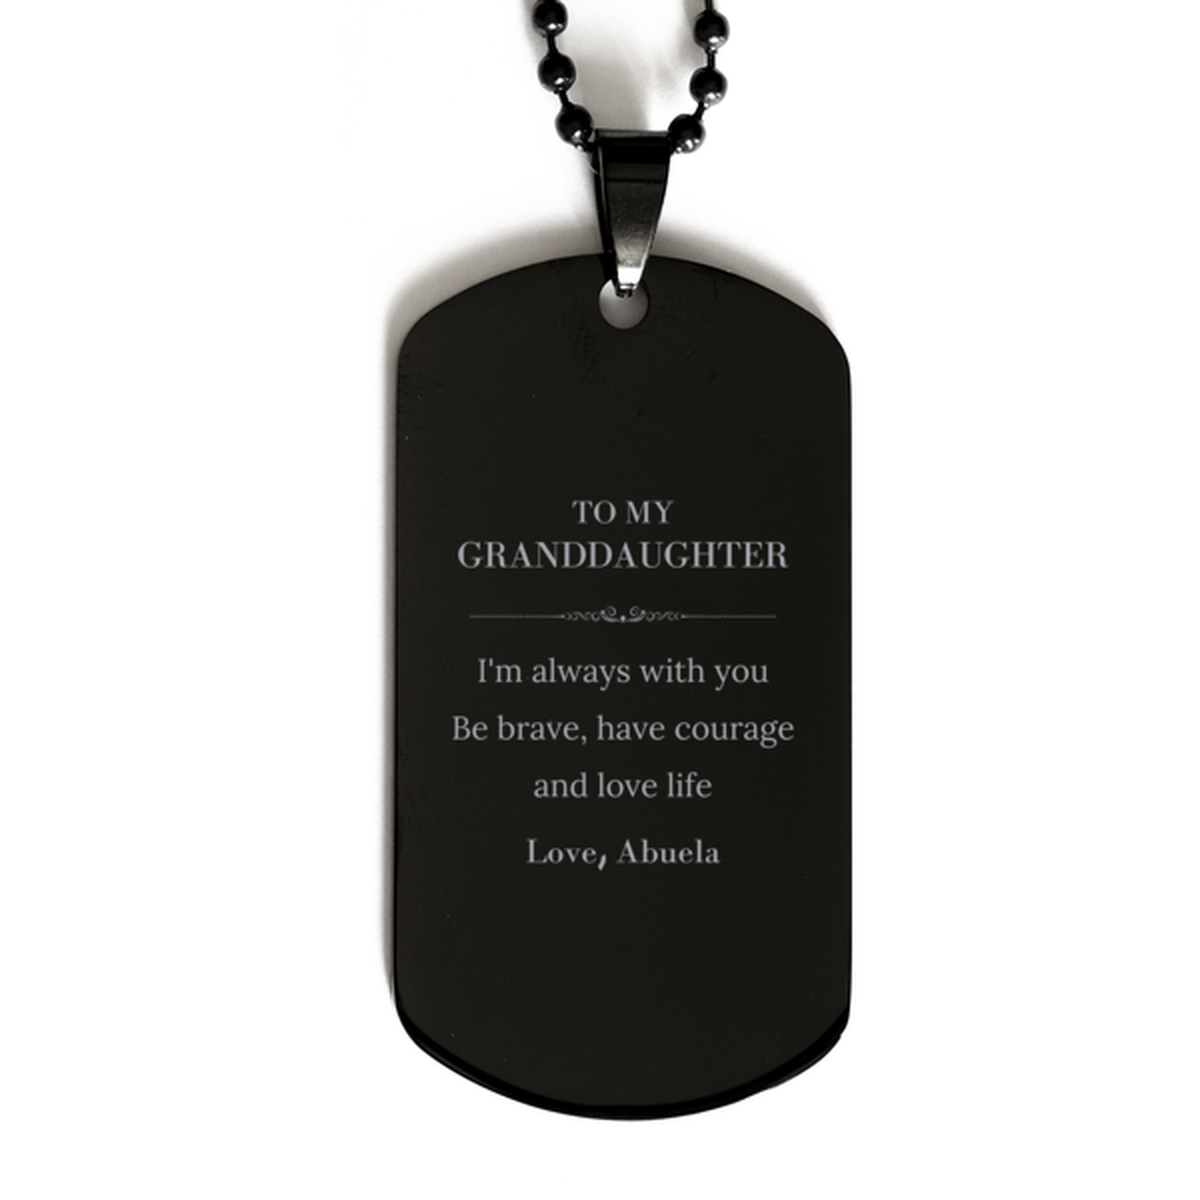 To My Granddaughter Gifts from Abuela, Unique Black Dog Tag Inspirational Christmas Birthday Graduation Gifts for Granddaughter I'm always with you. Be brave, have courage and love life. Love, Abuela